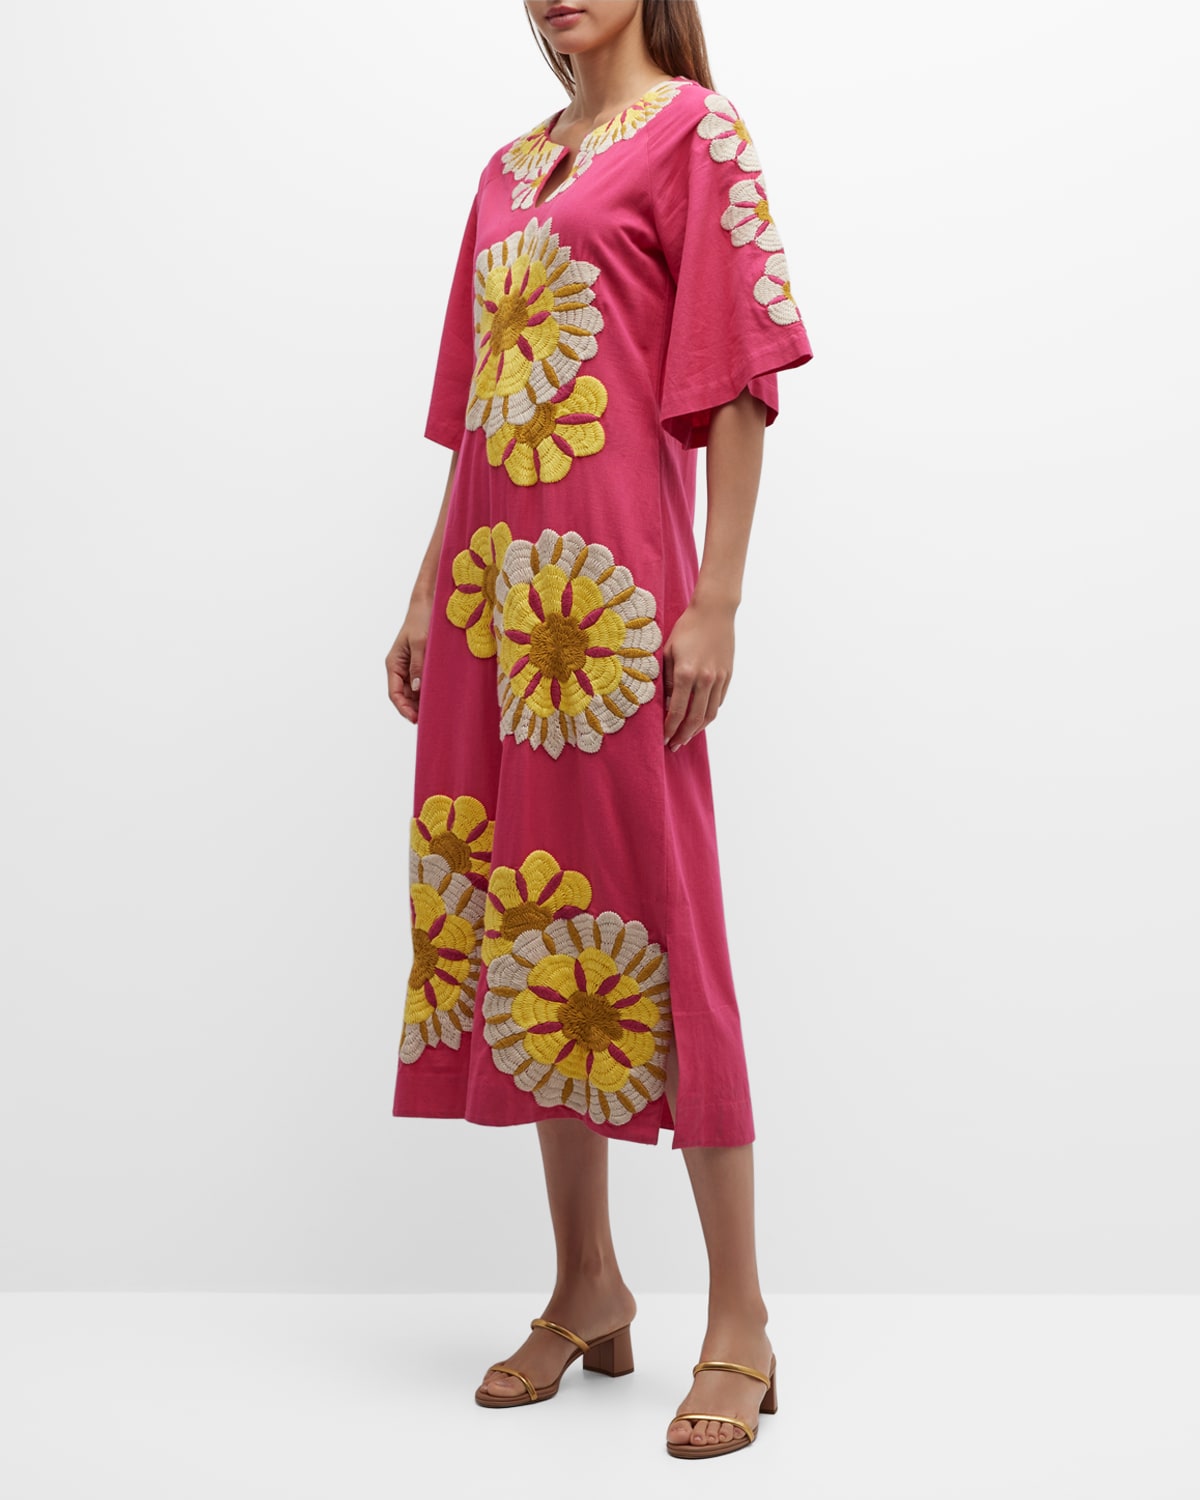 Delightful Floral-Embroidered Cotton Caftan